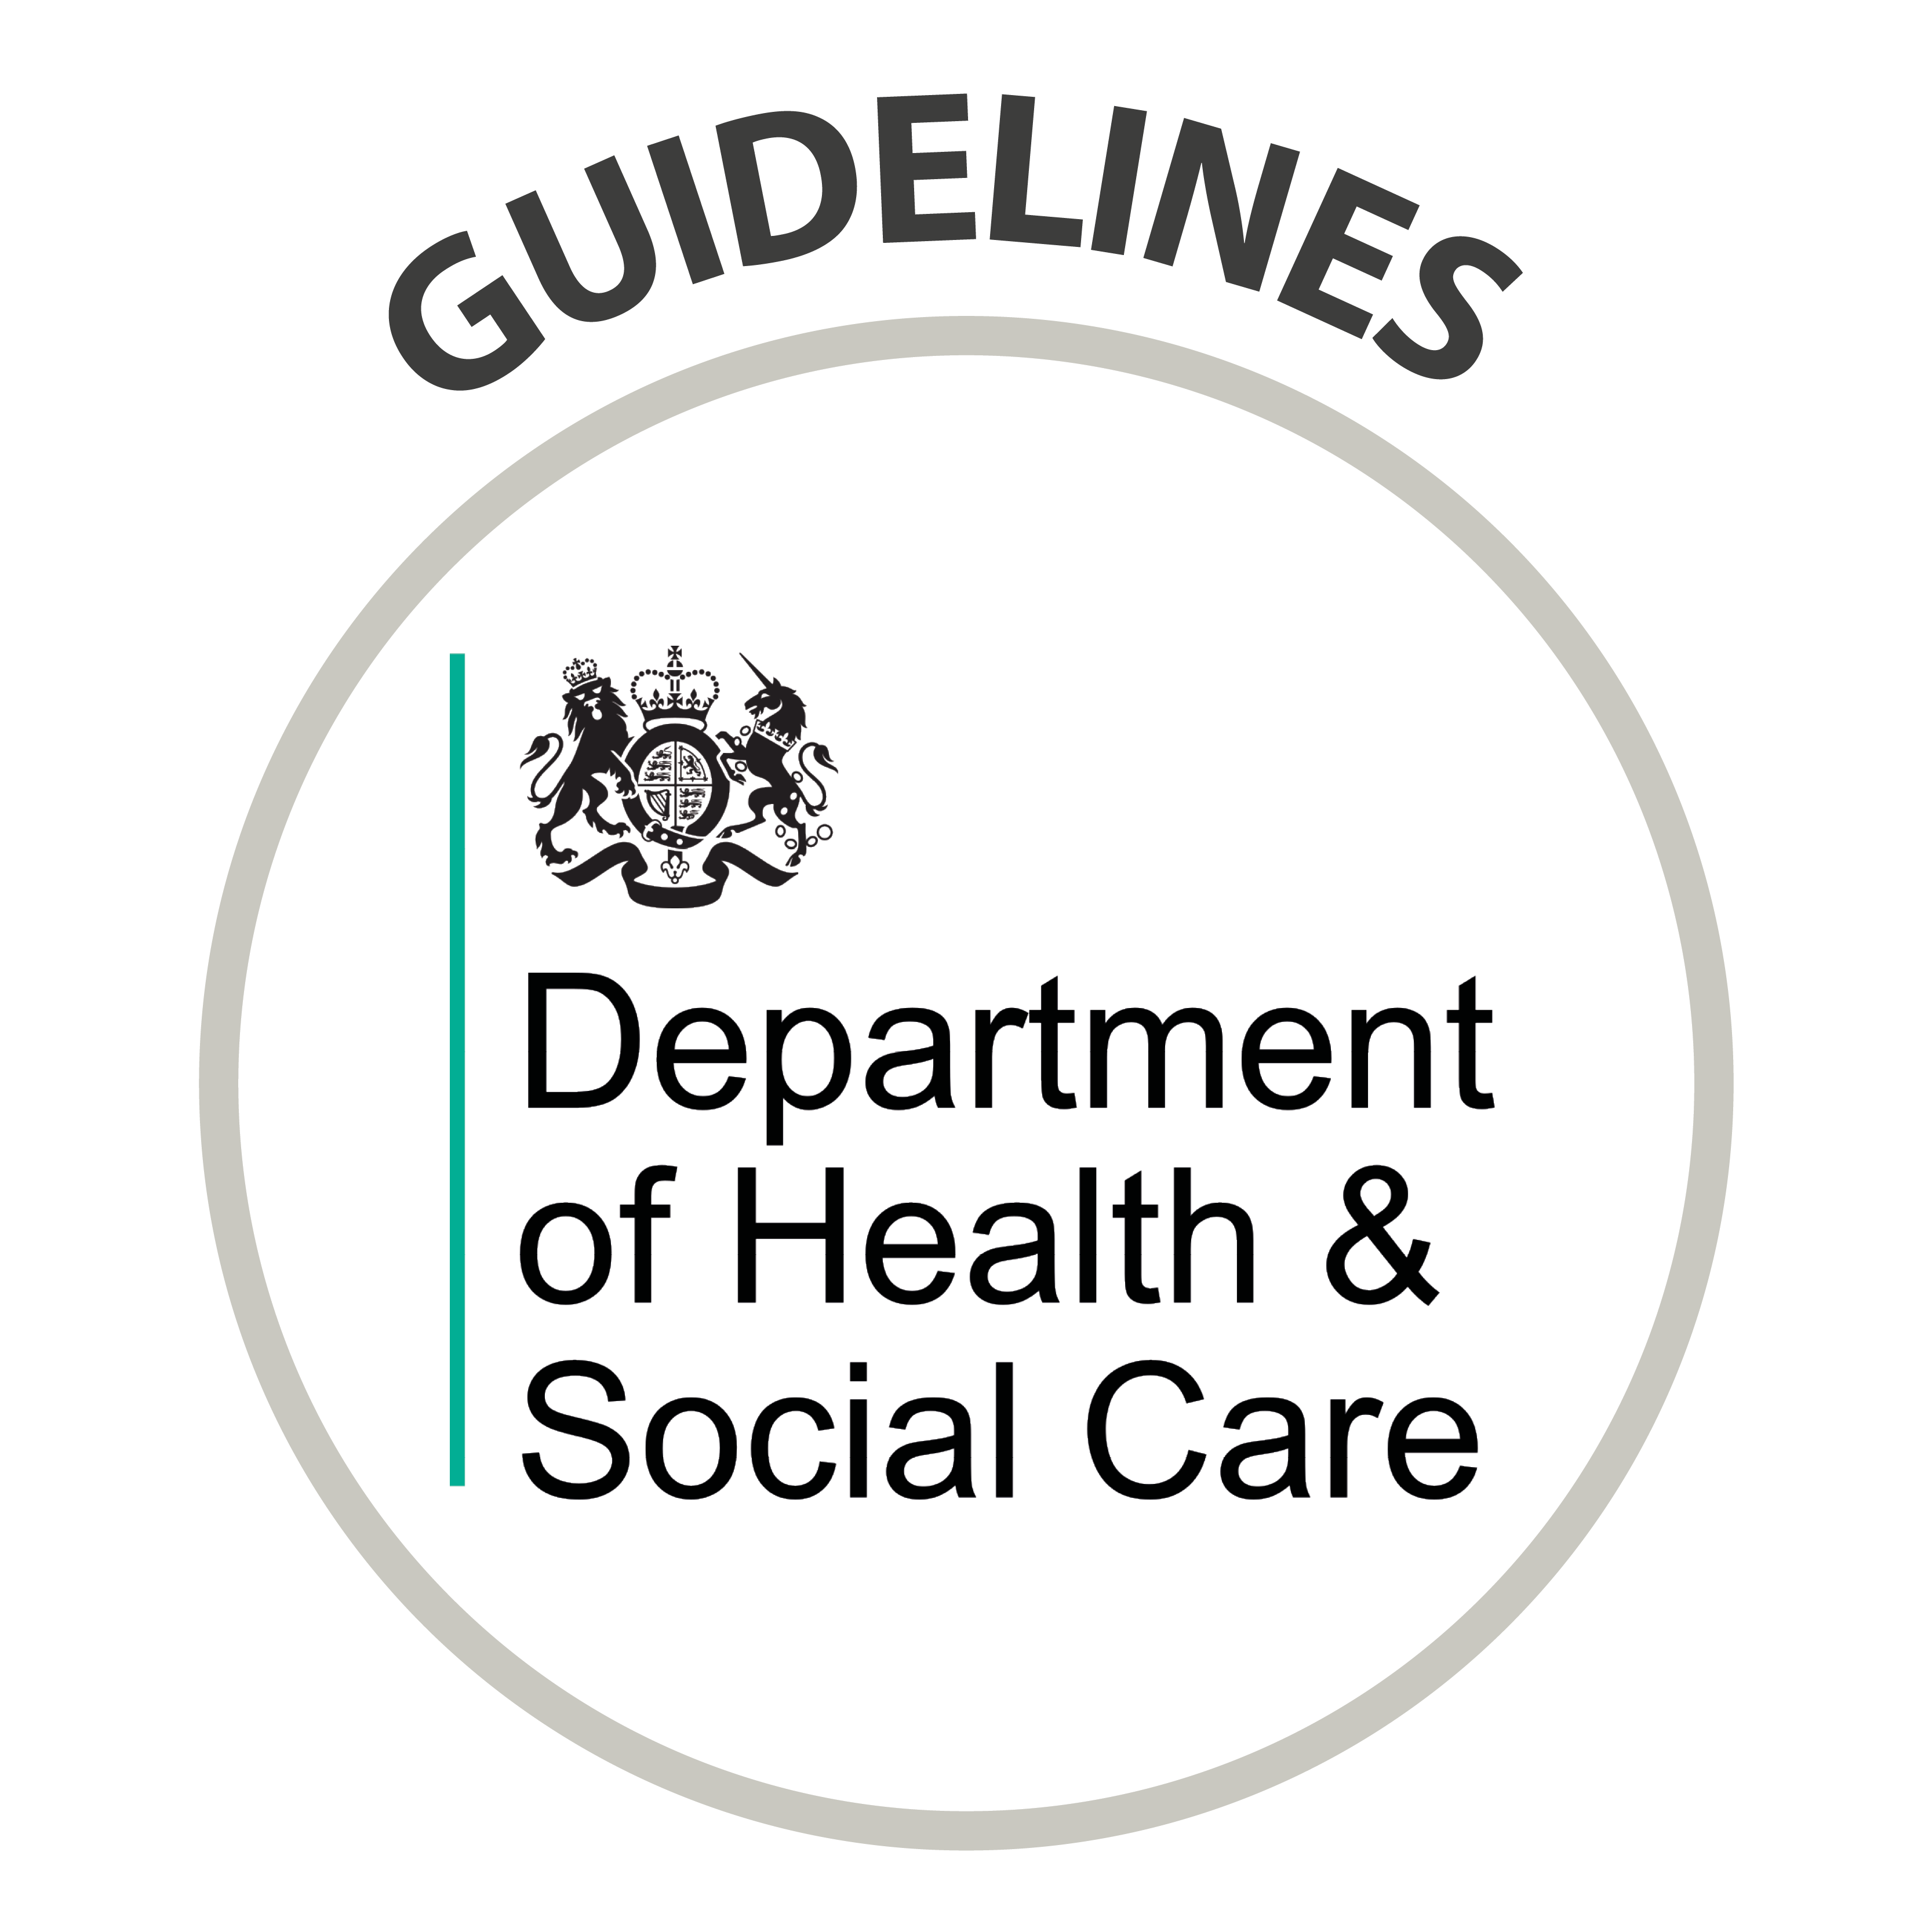 Guidelines - Department of Health & Social Care Logo